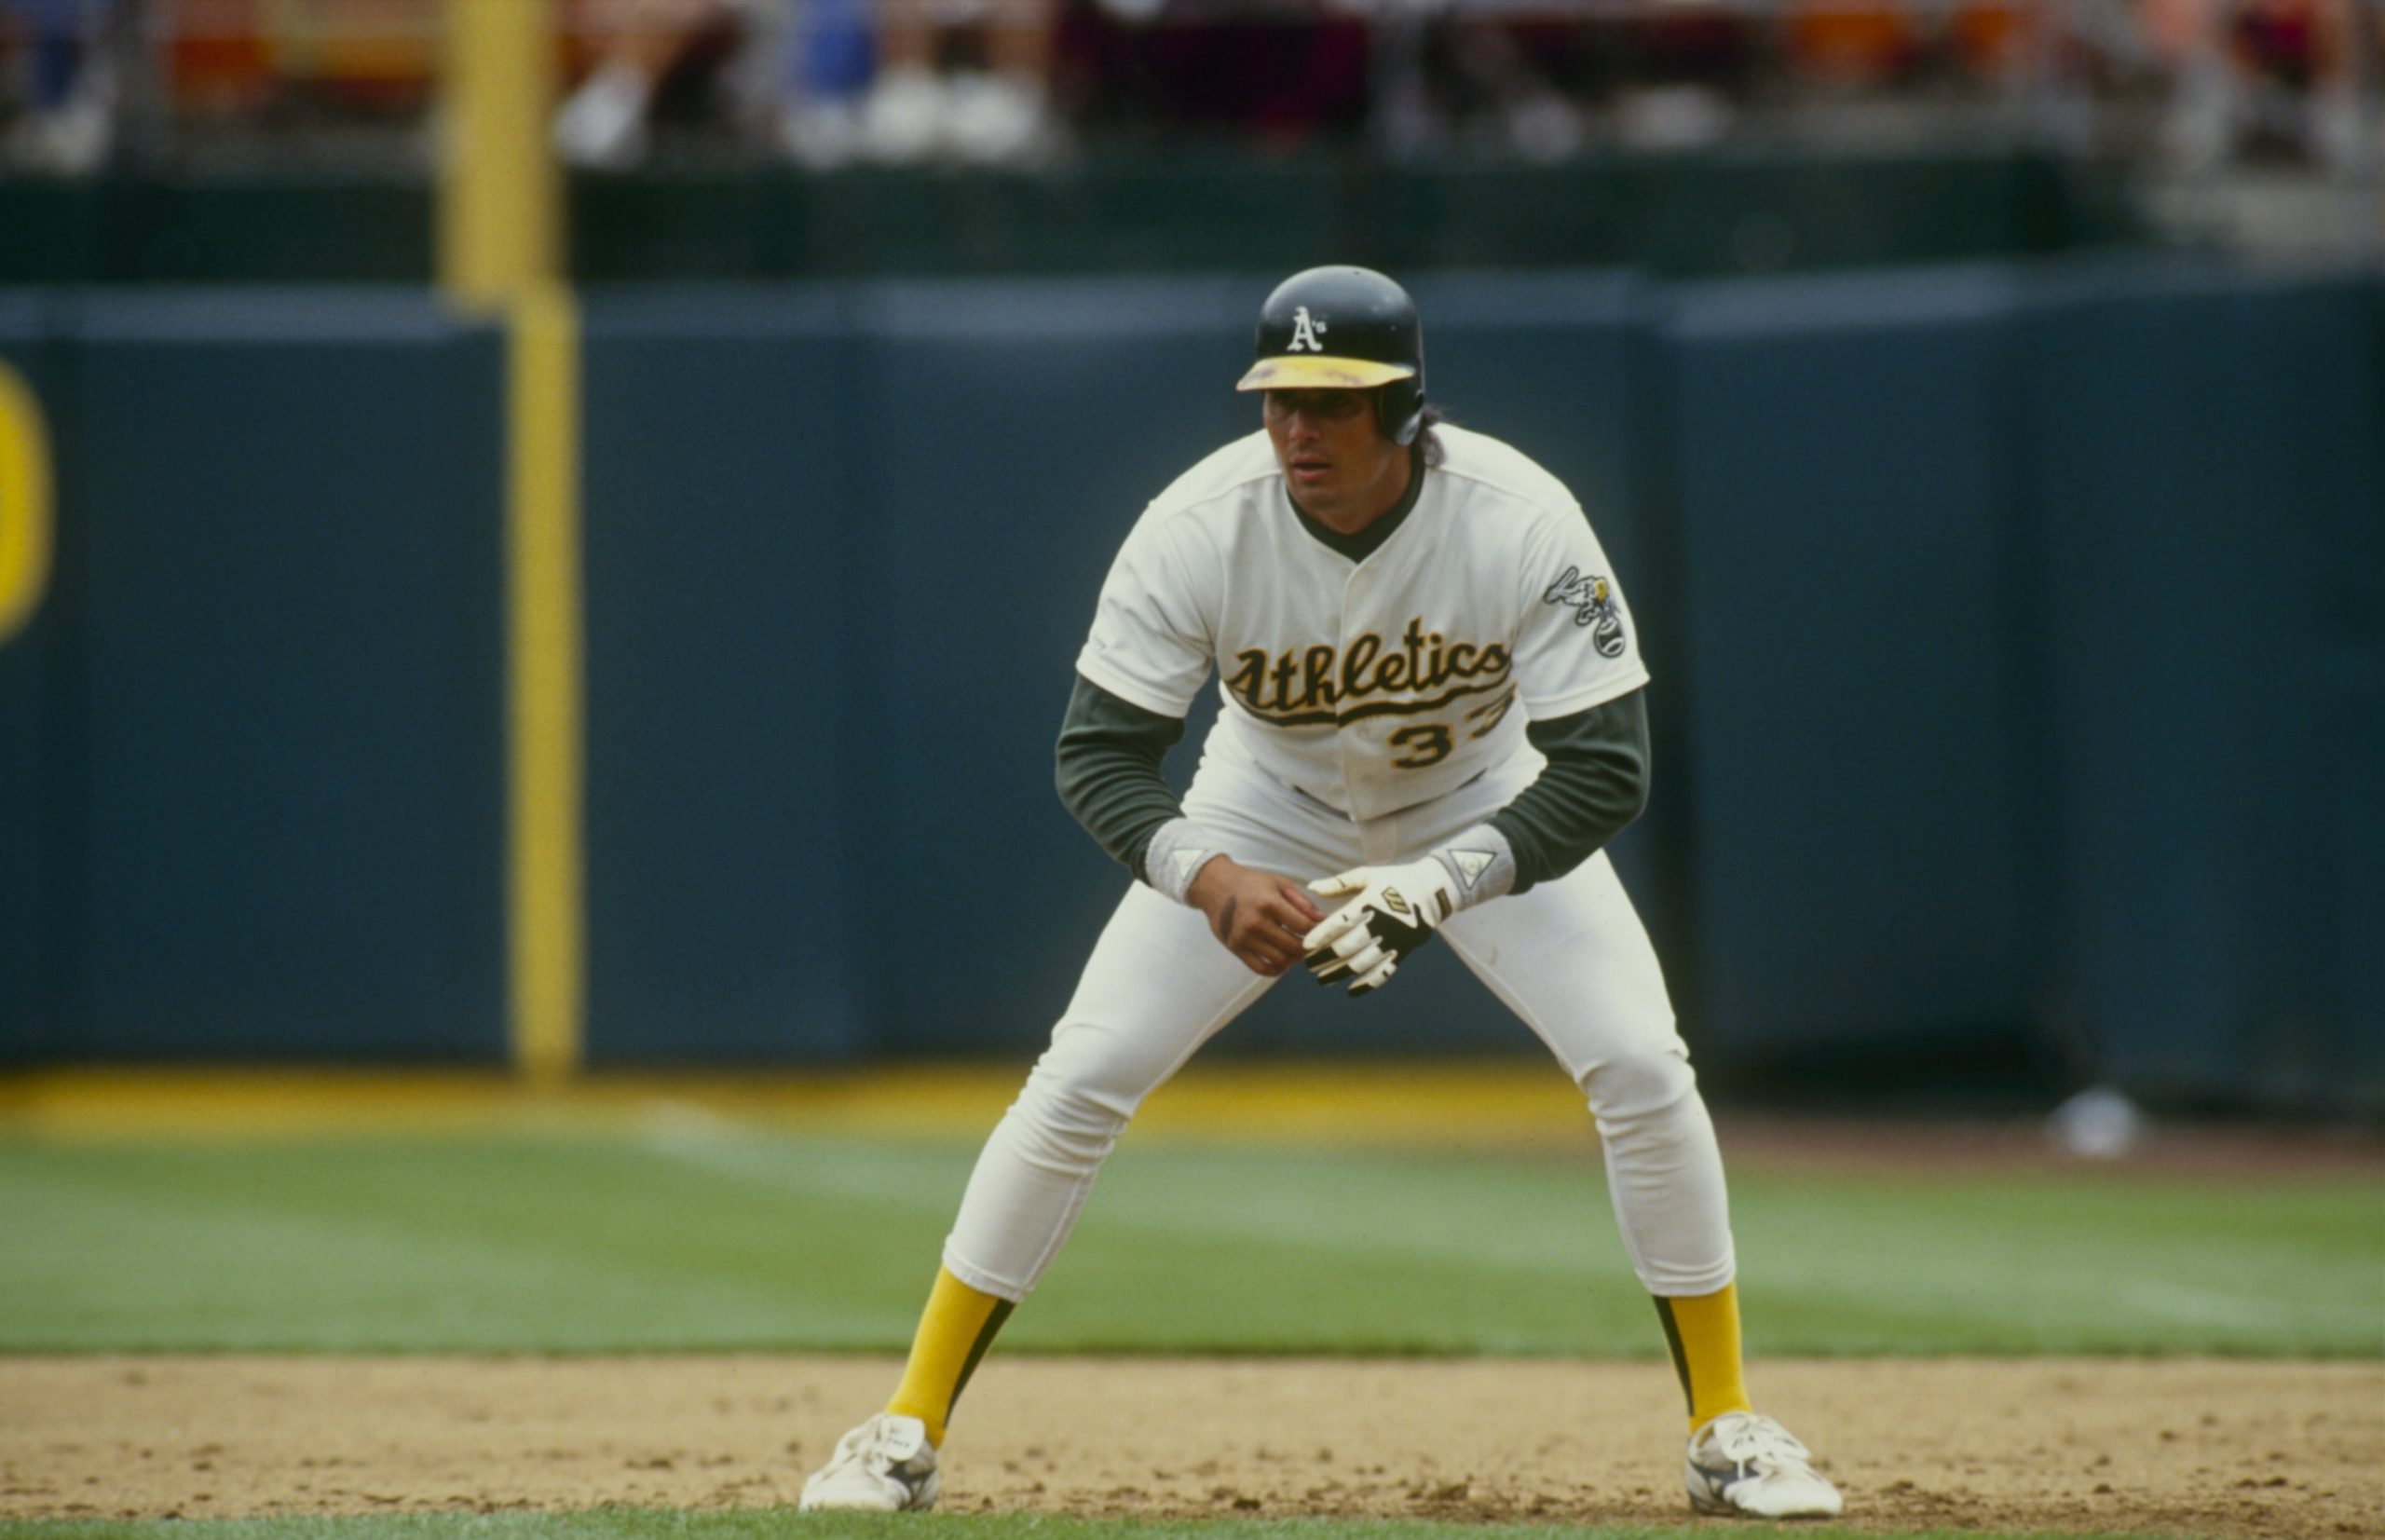 Jose Canseco of the Oakland Athletics leads off first base.